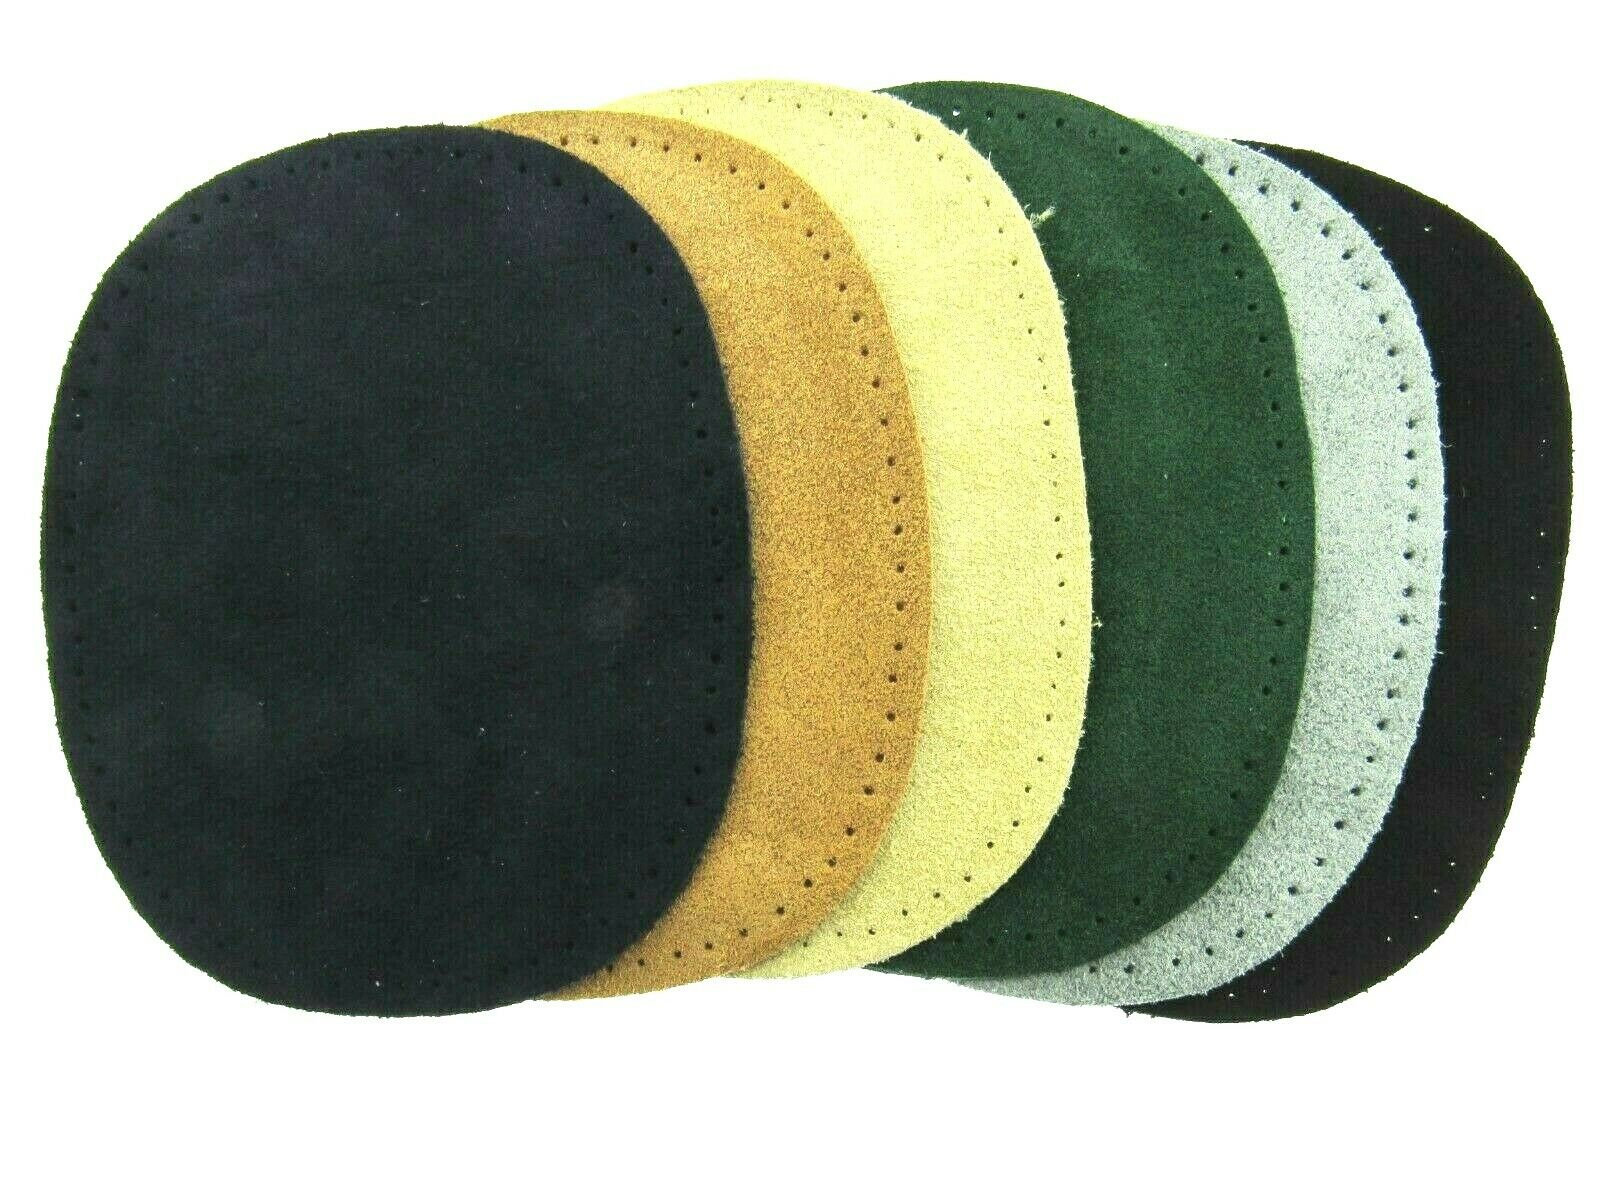 Dritz Suede Cowhide Elbow Patches - 4 colors - Stonemountain